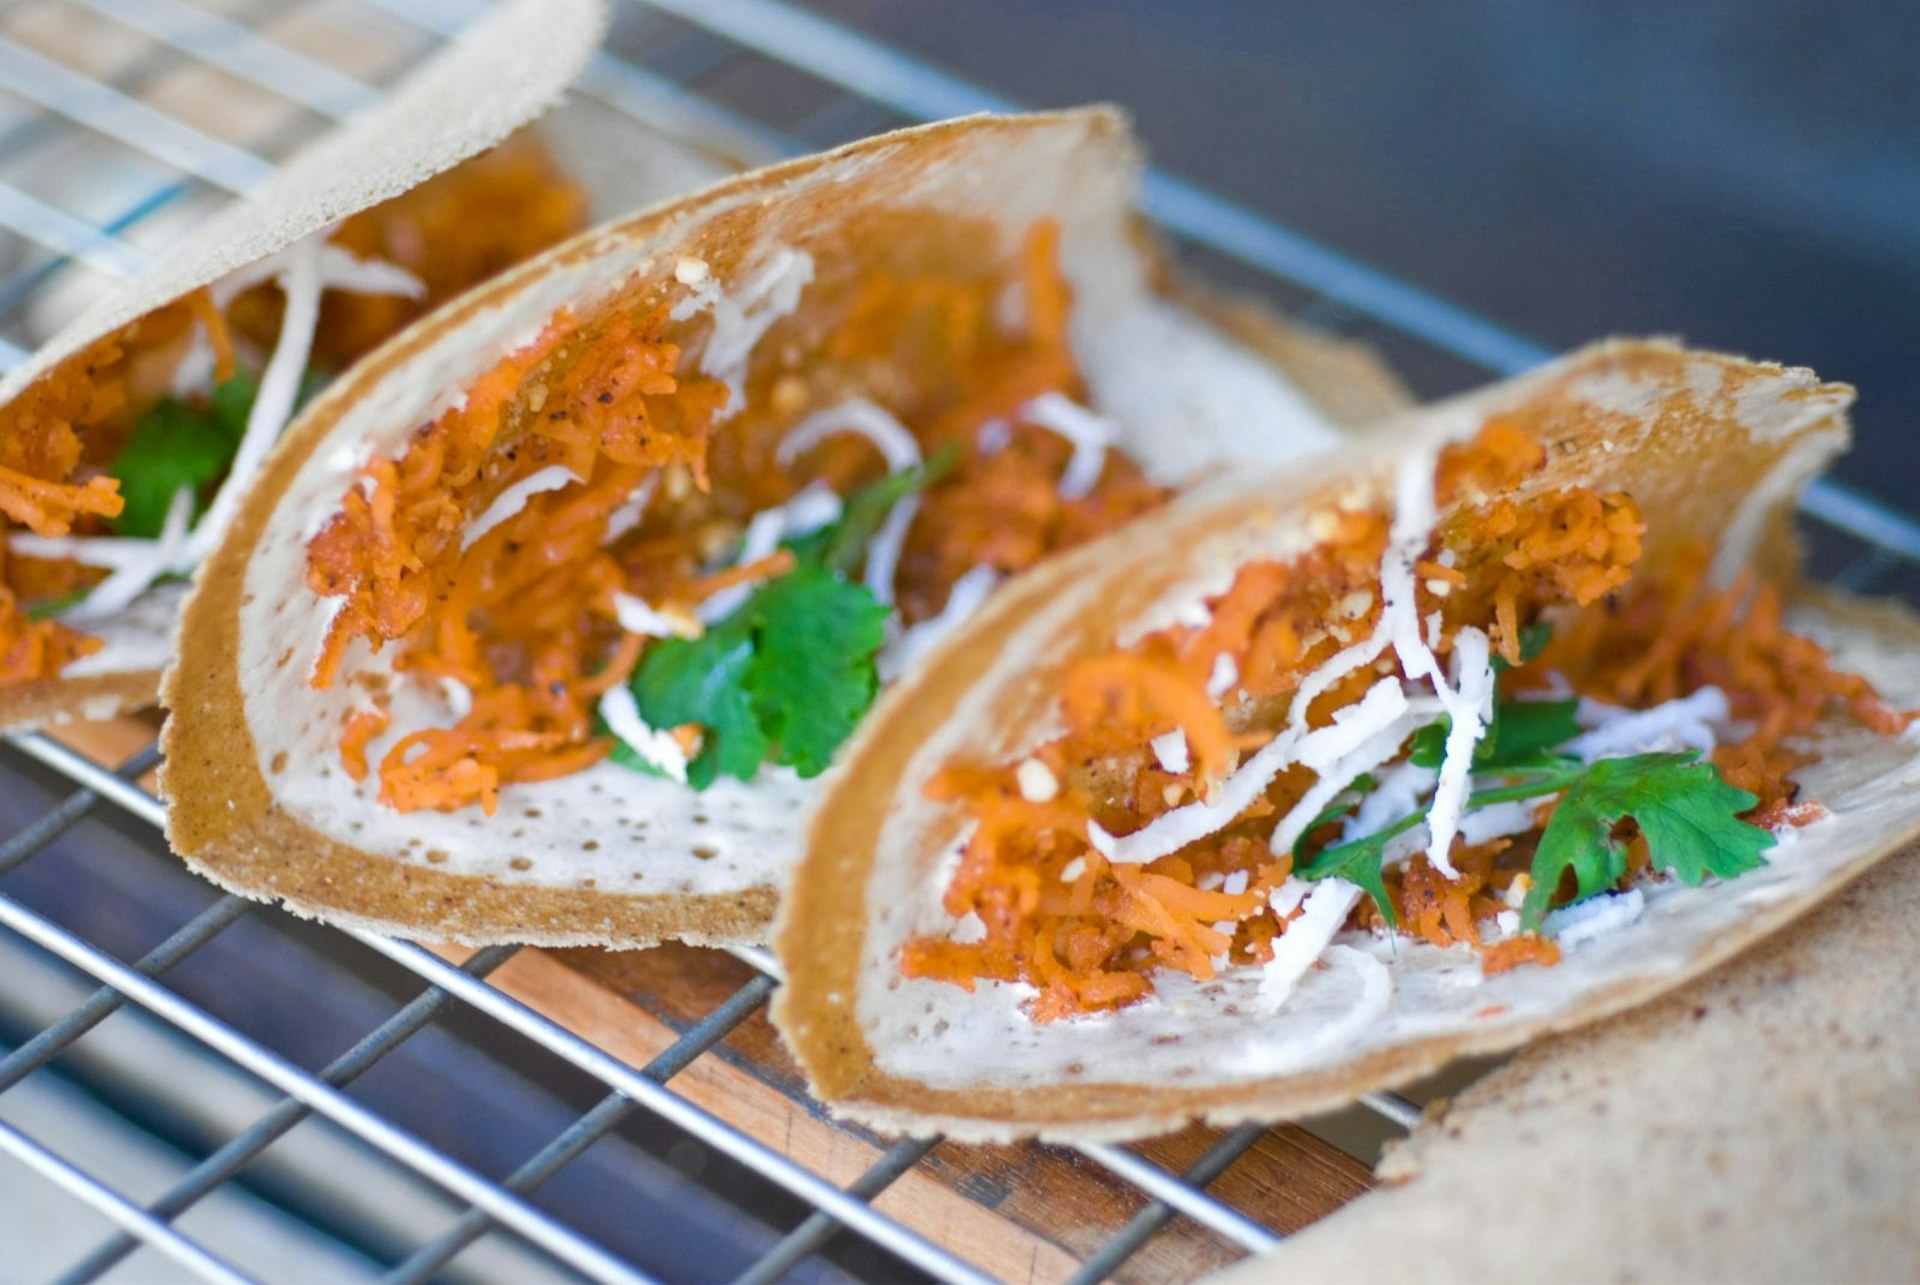 Kanom beuang, sweet and savoury taco-like snacks, for sale on the streets of Bangkok © Austin Bush / Lonely Planet